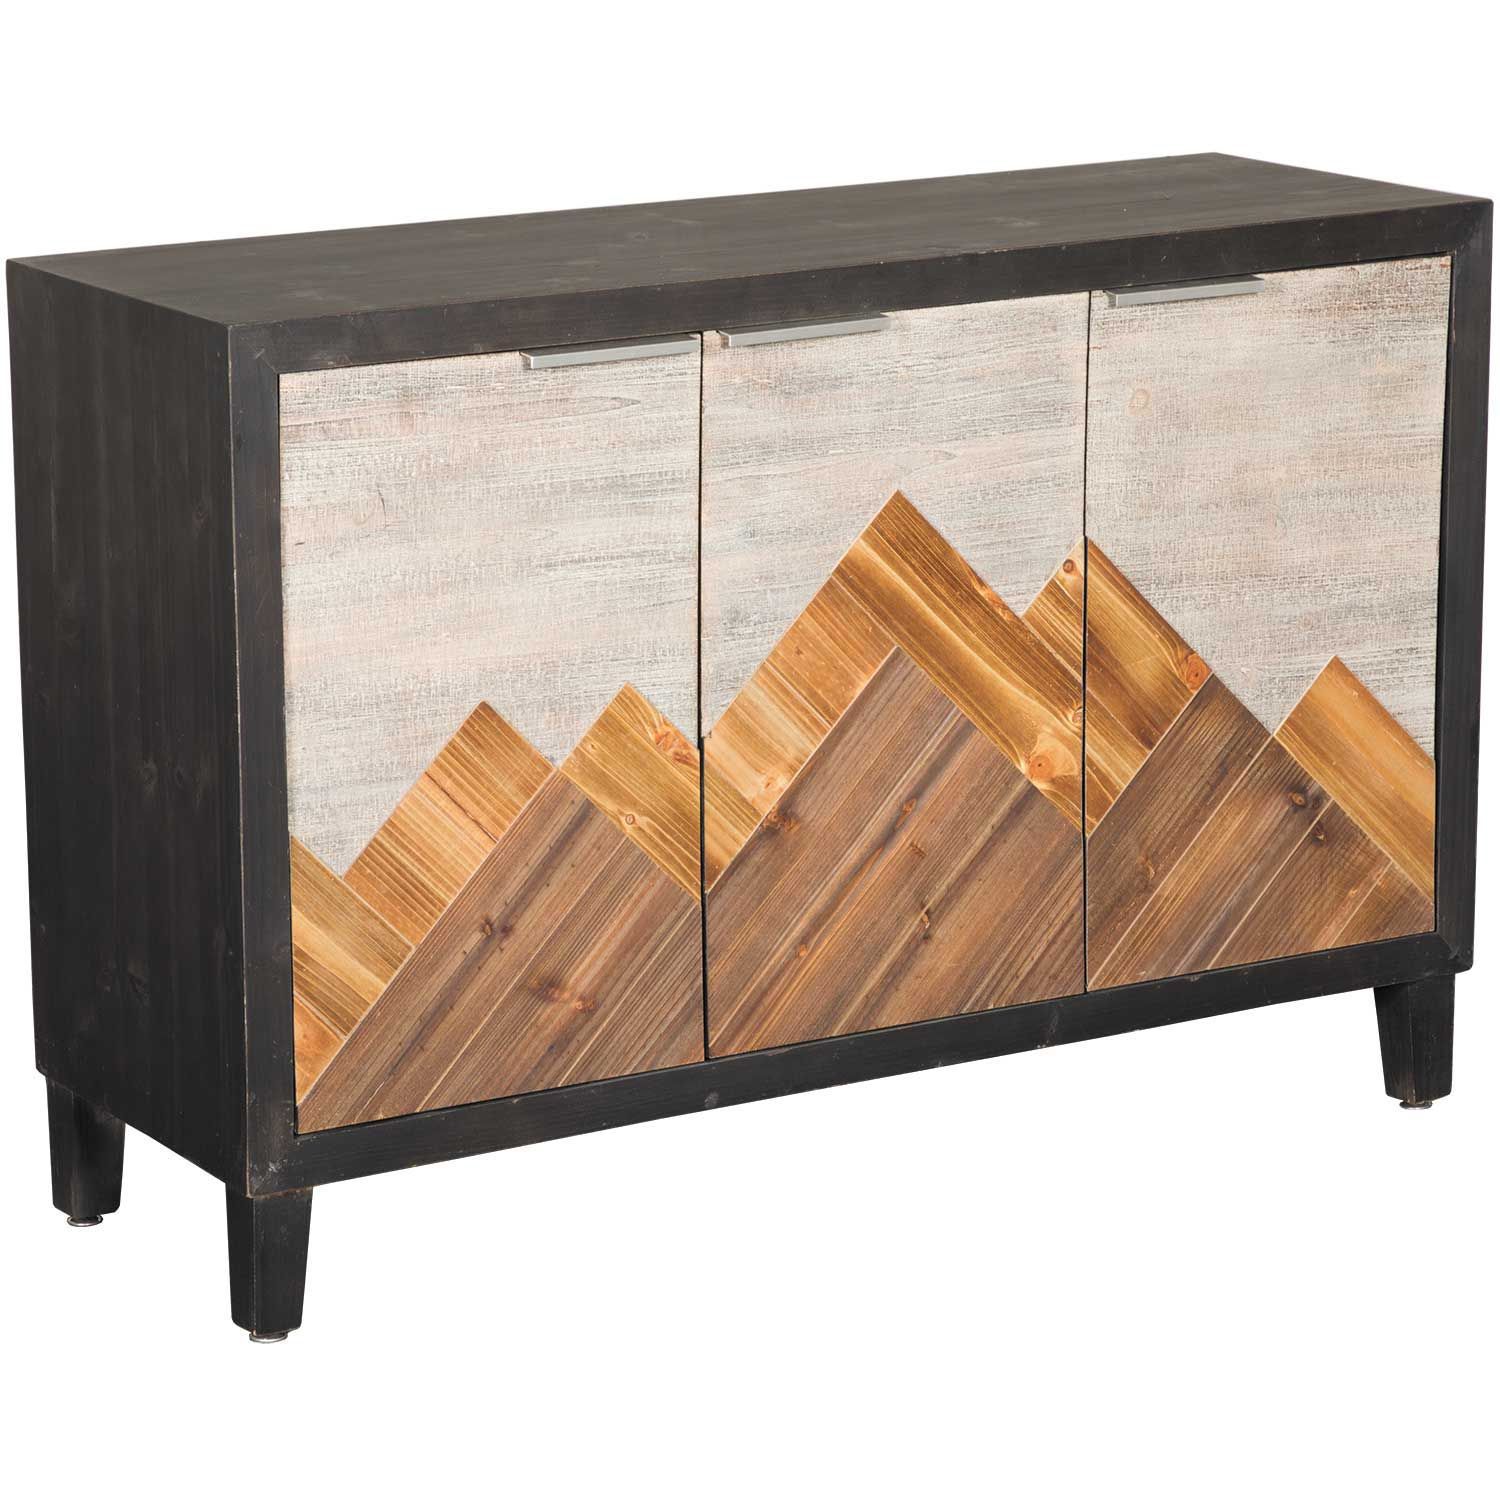 Mountain 3 Door Accent Cabinet | Home Accents | Afw Inside 3 Door Accent Cabinet Sideboards (View 6 of 15)